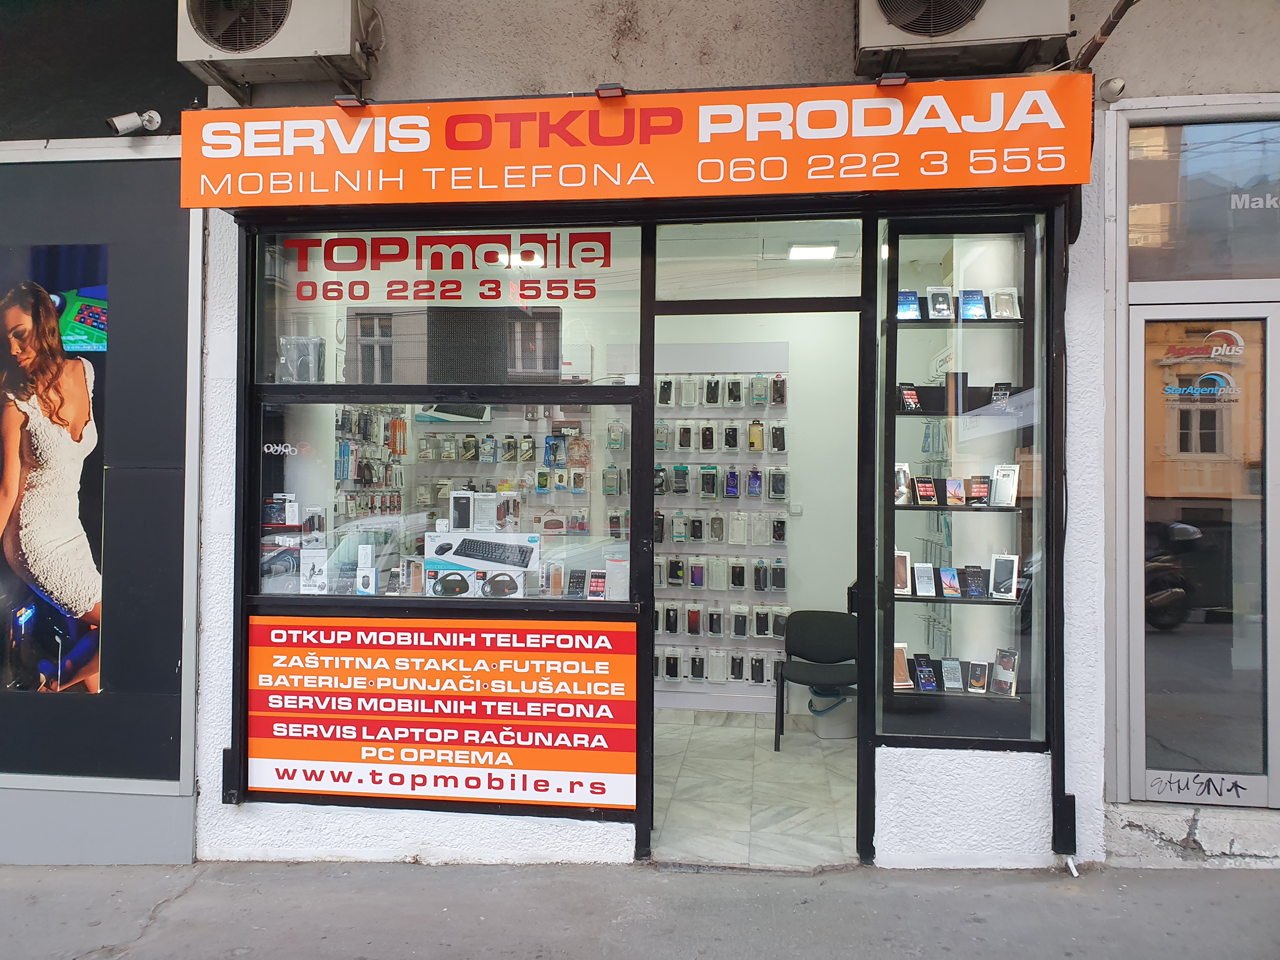 TOP MOBILE - PURCHASE, SERVICE AND SALE OF MOBILE PHONES Mobile phones service Belgrade - Photo 1